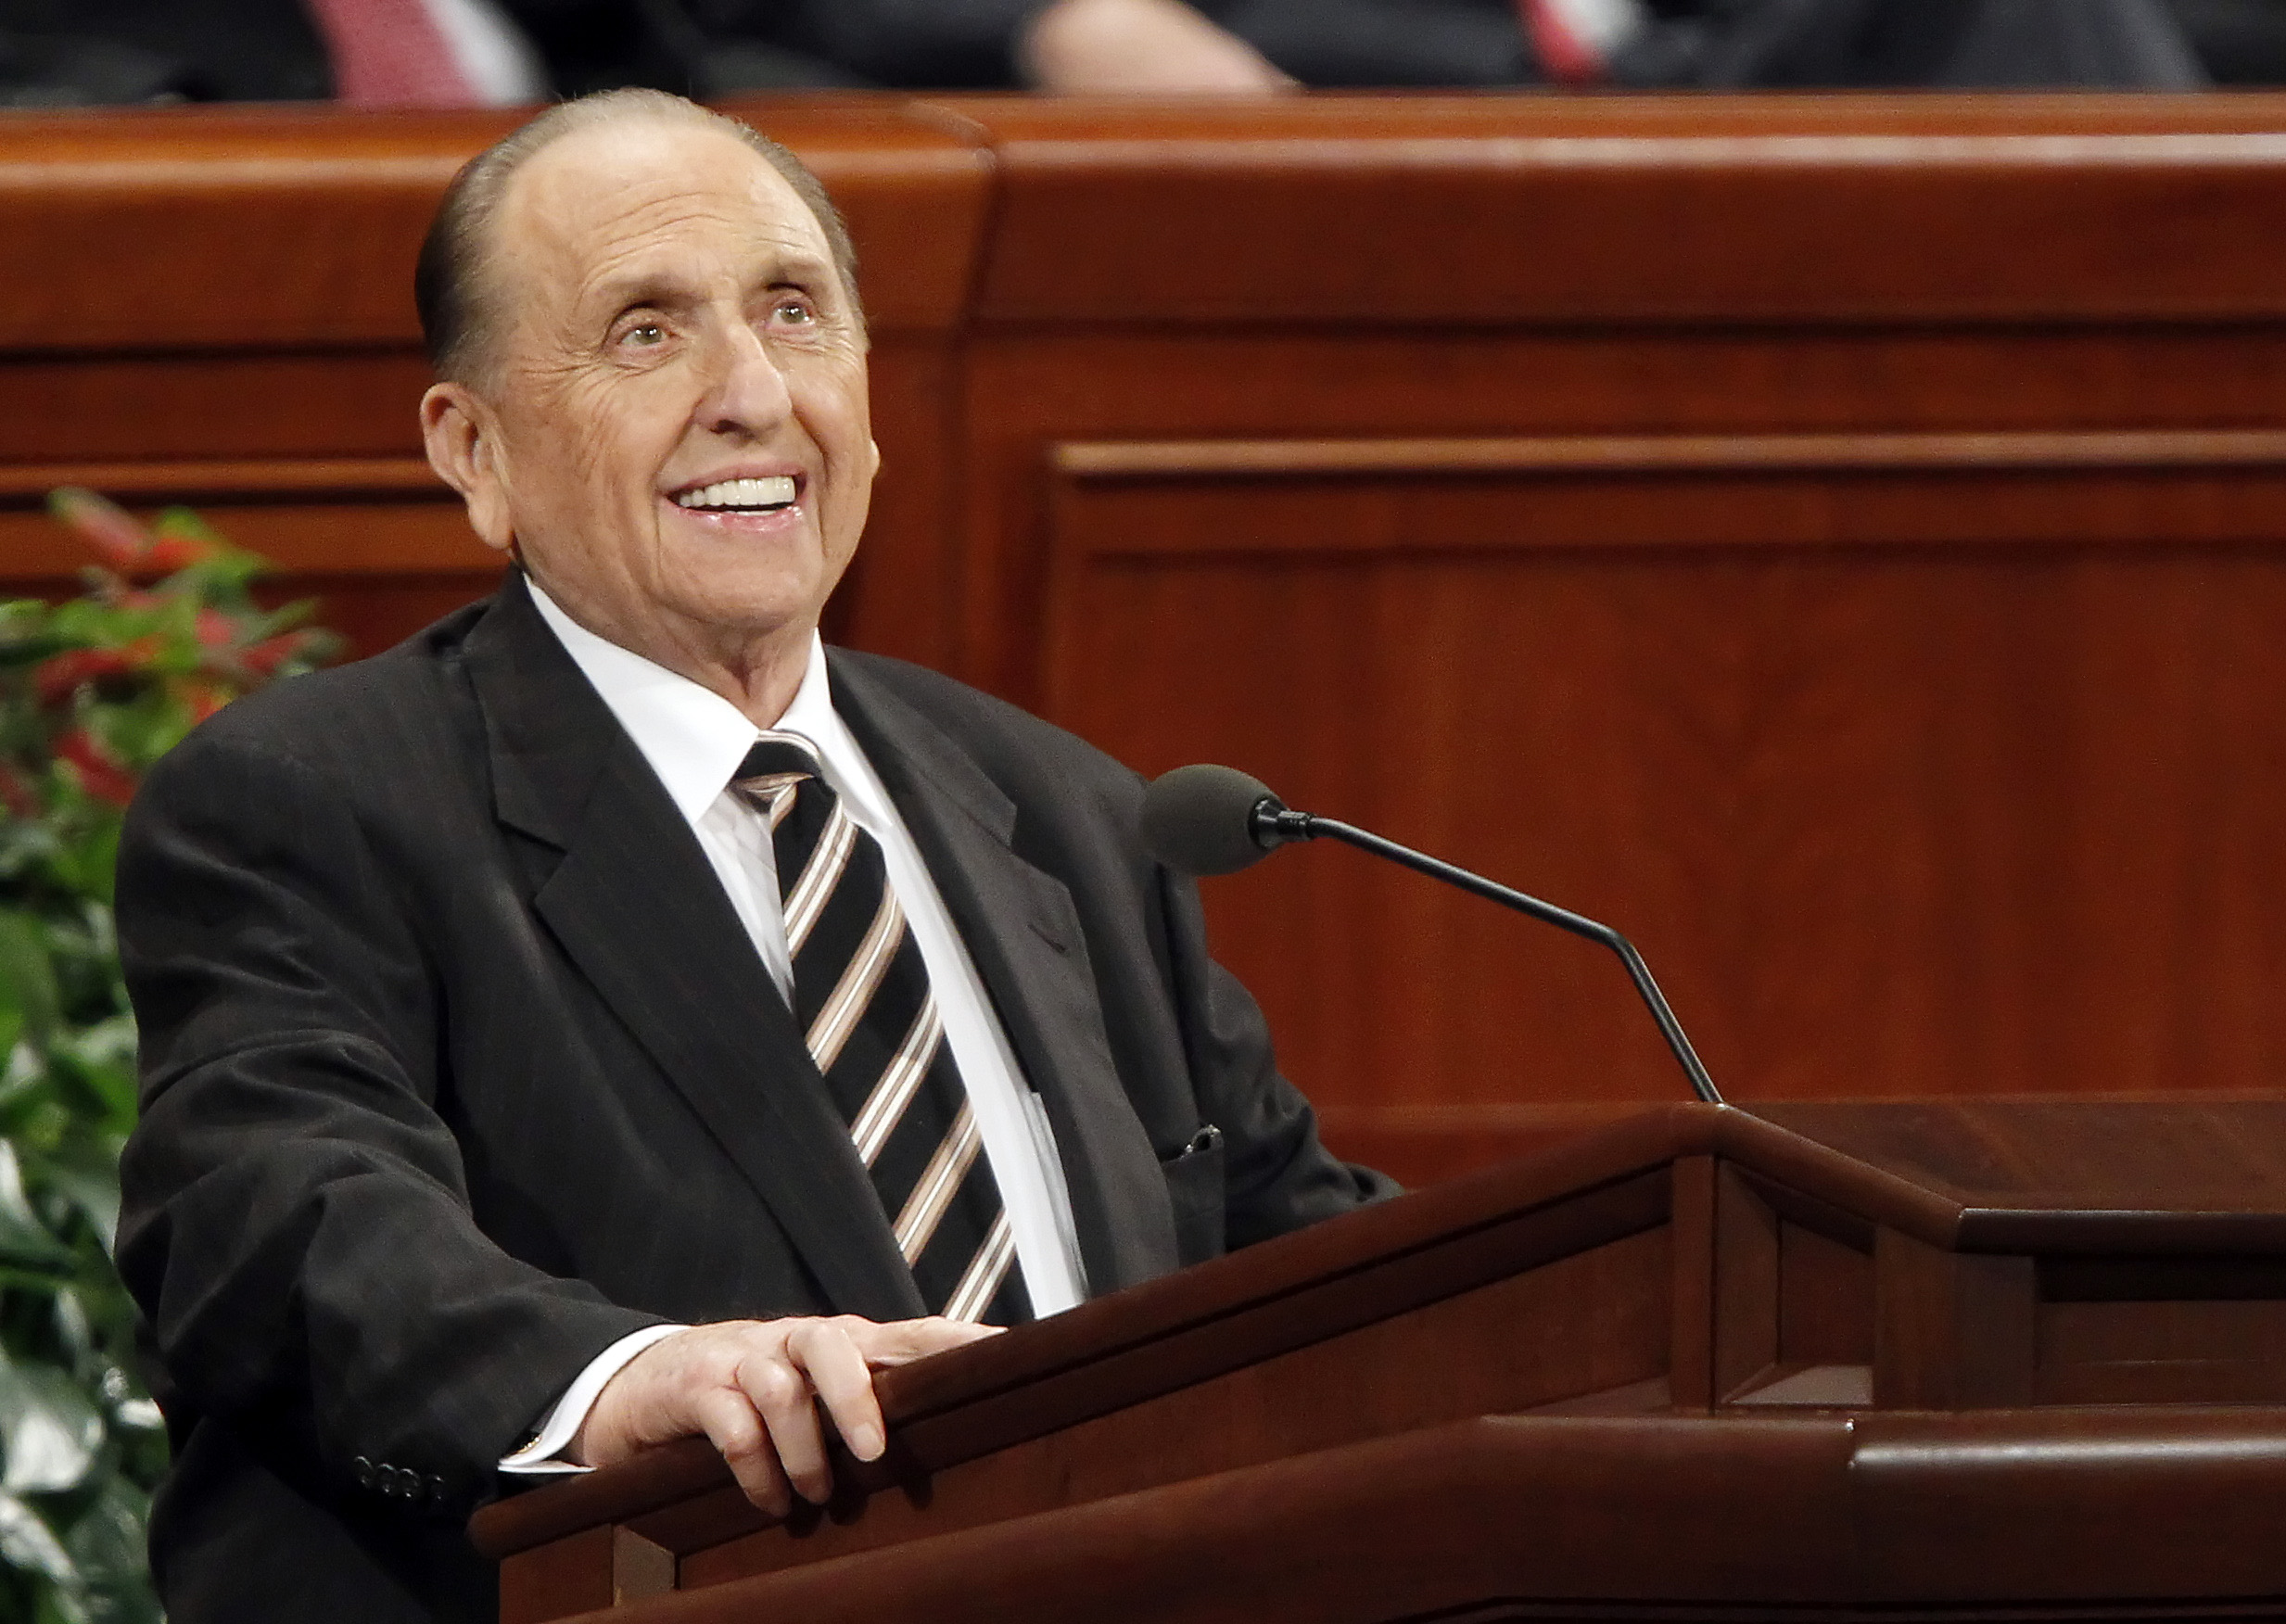 Thomas Monson, president of the Church of Jesus Christ of Latter-day Saints, speaks at the Church's 181st Semiannual General Conference in Salt Lake City, Utah on Oct. 1, 2011. (George Frey—Bloomberg/Getty Images)